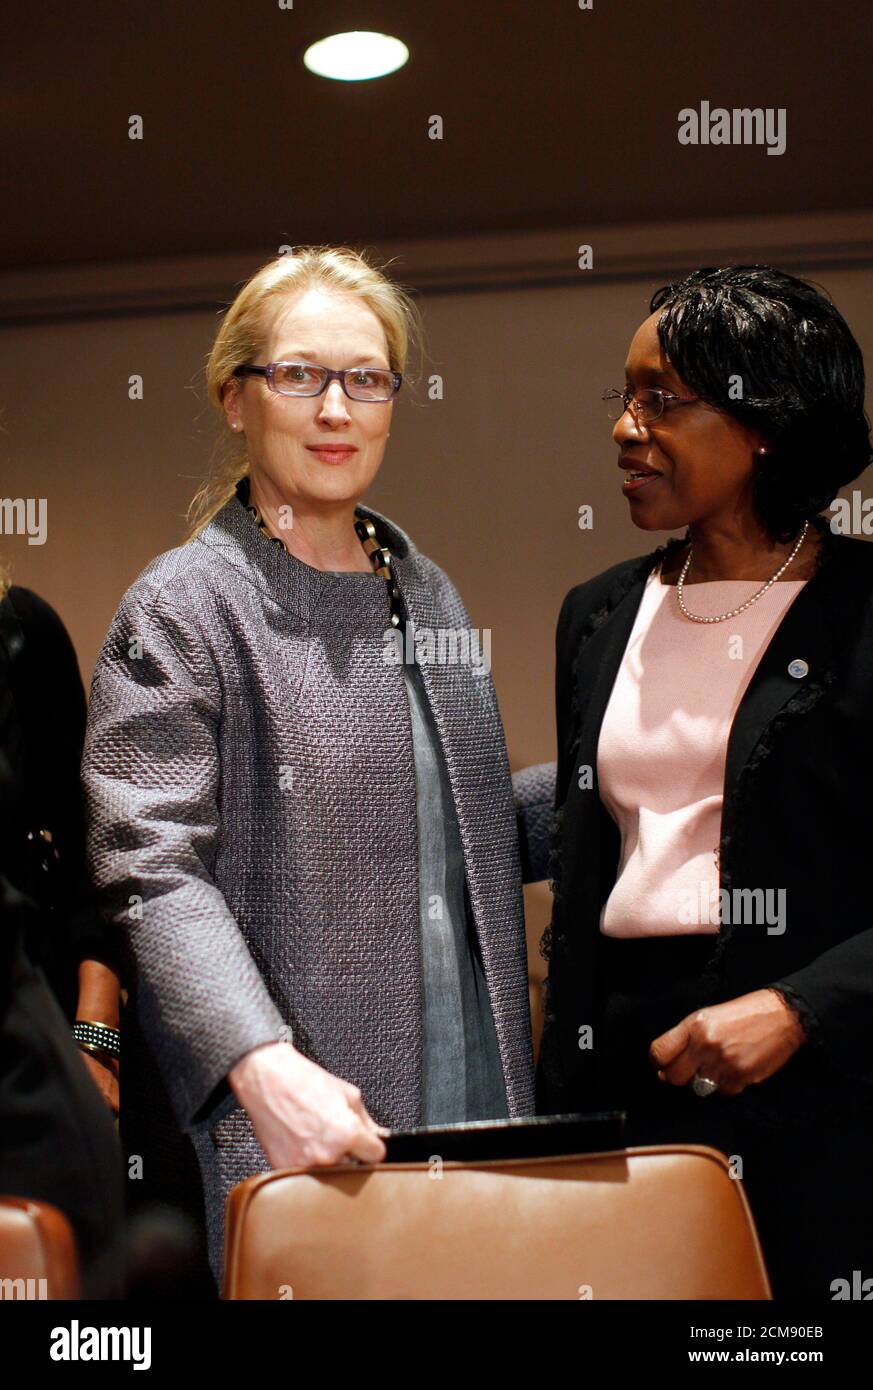 Actress Meryl Streep (L) speaks with UN Special Adviser of the Secretary-General on Gender Issues and Advancement of Women Rachel Mayanja at the United Nations Headquarters in New York March 5, 2010. Streep was at the UN to address the Beijing +15 special event 'Women Can't Wait'.     REUTERS/Brendan McDermid (UNITED STATES - Tags: ENTERTAINMENT) Stock Photo